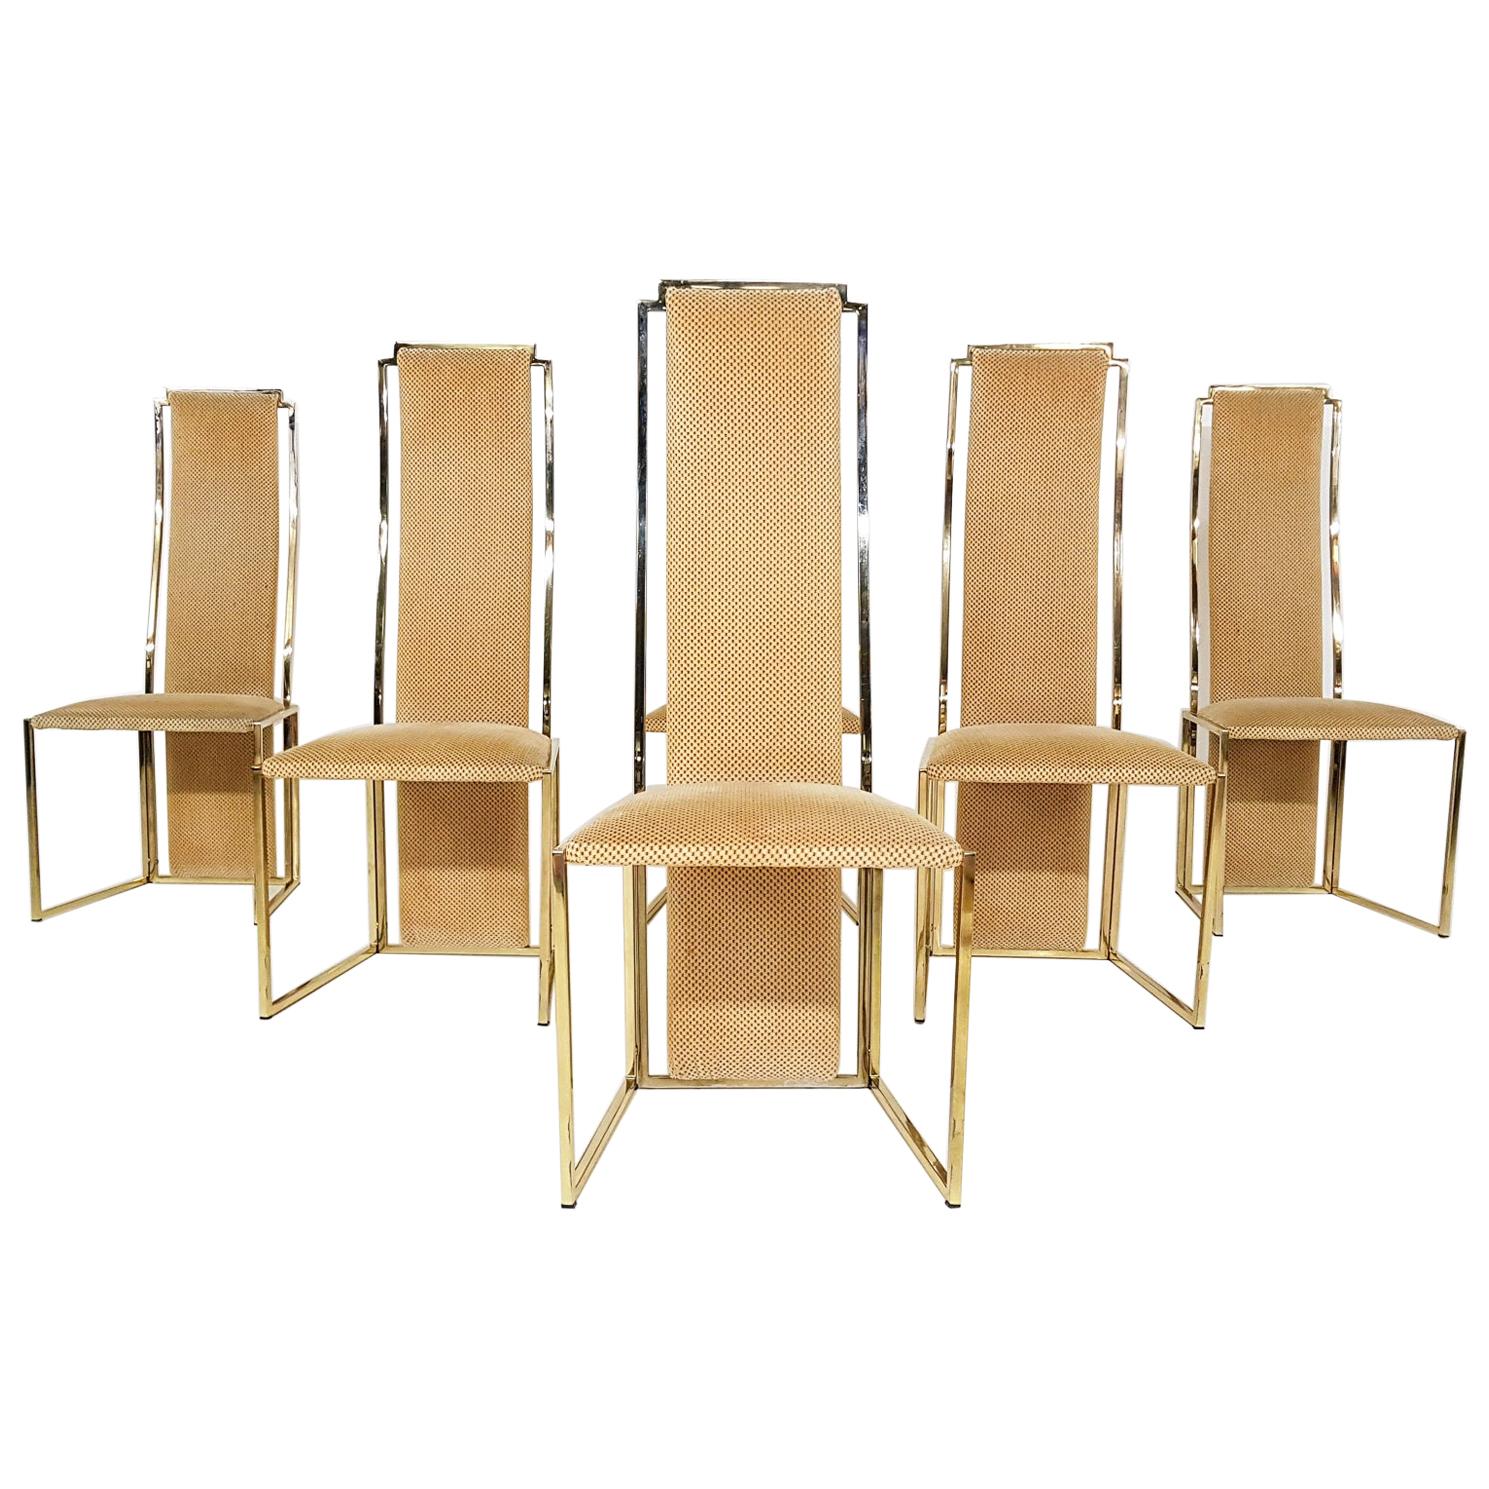 Set of 6 Alain Delon Gold-Plated High Back Dining Chairs, France, 1980s